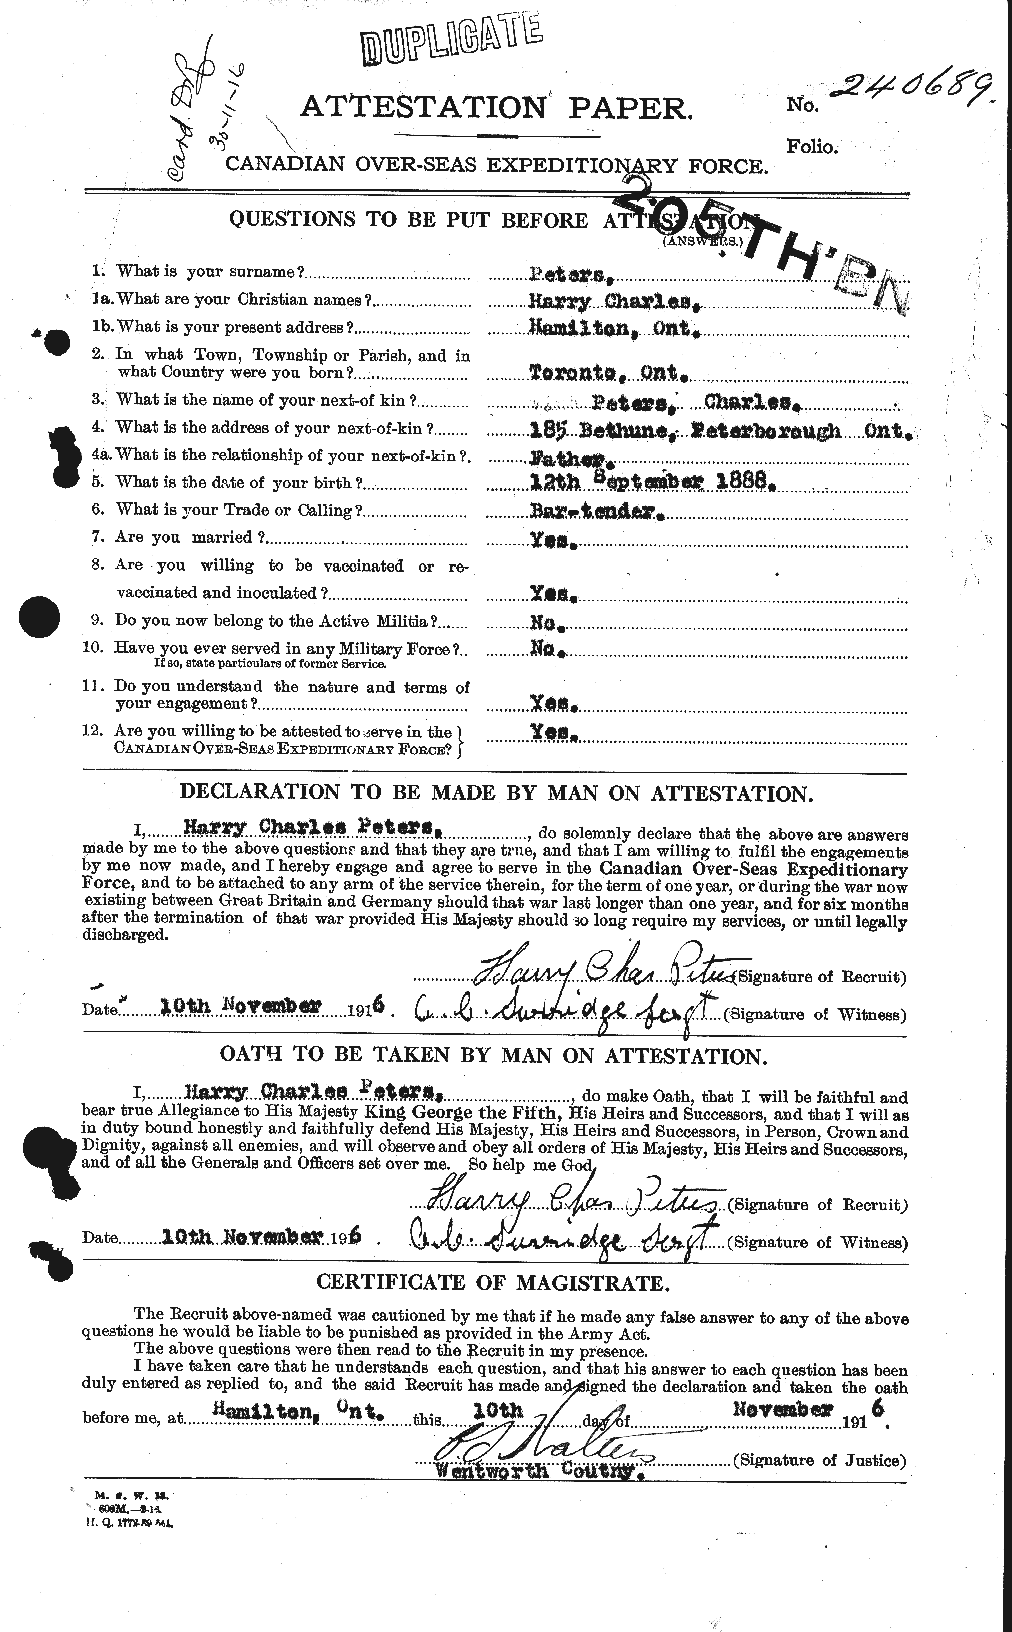 Personnel Records of the First World War - CEF 575478a